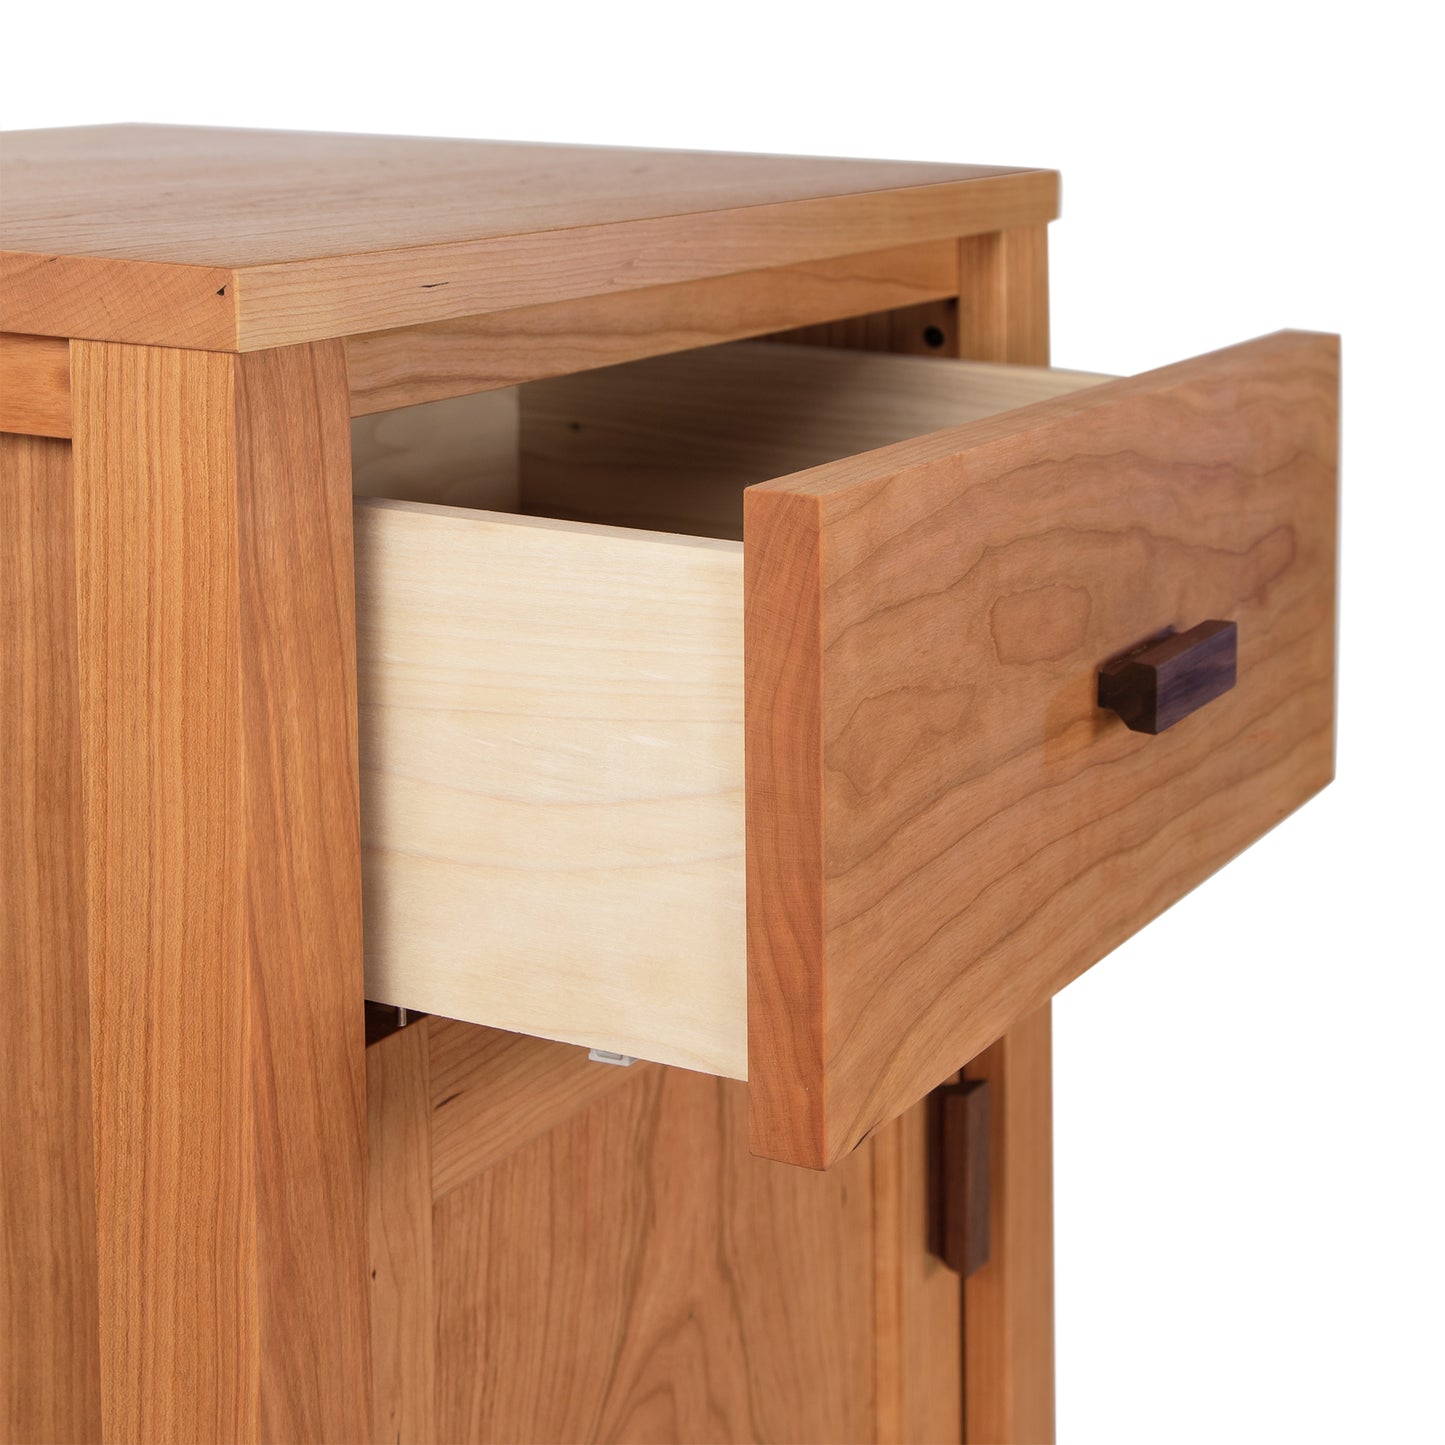 The Maple Corner Woodworks Andover Modern 1-Drawer Nightstand with Door is made from sustainably sourced hardwoods.